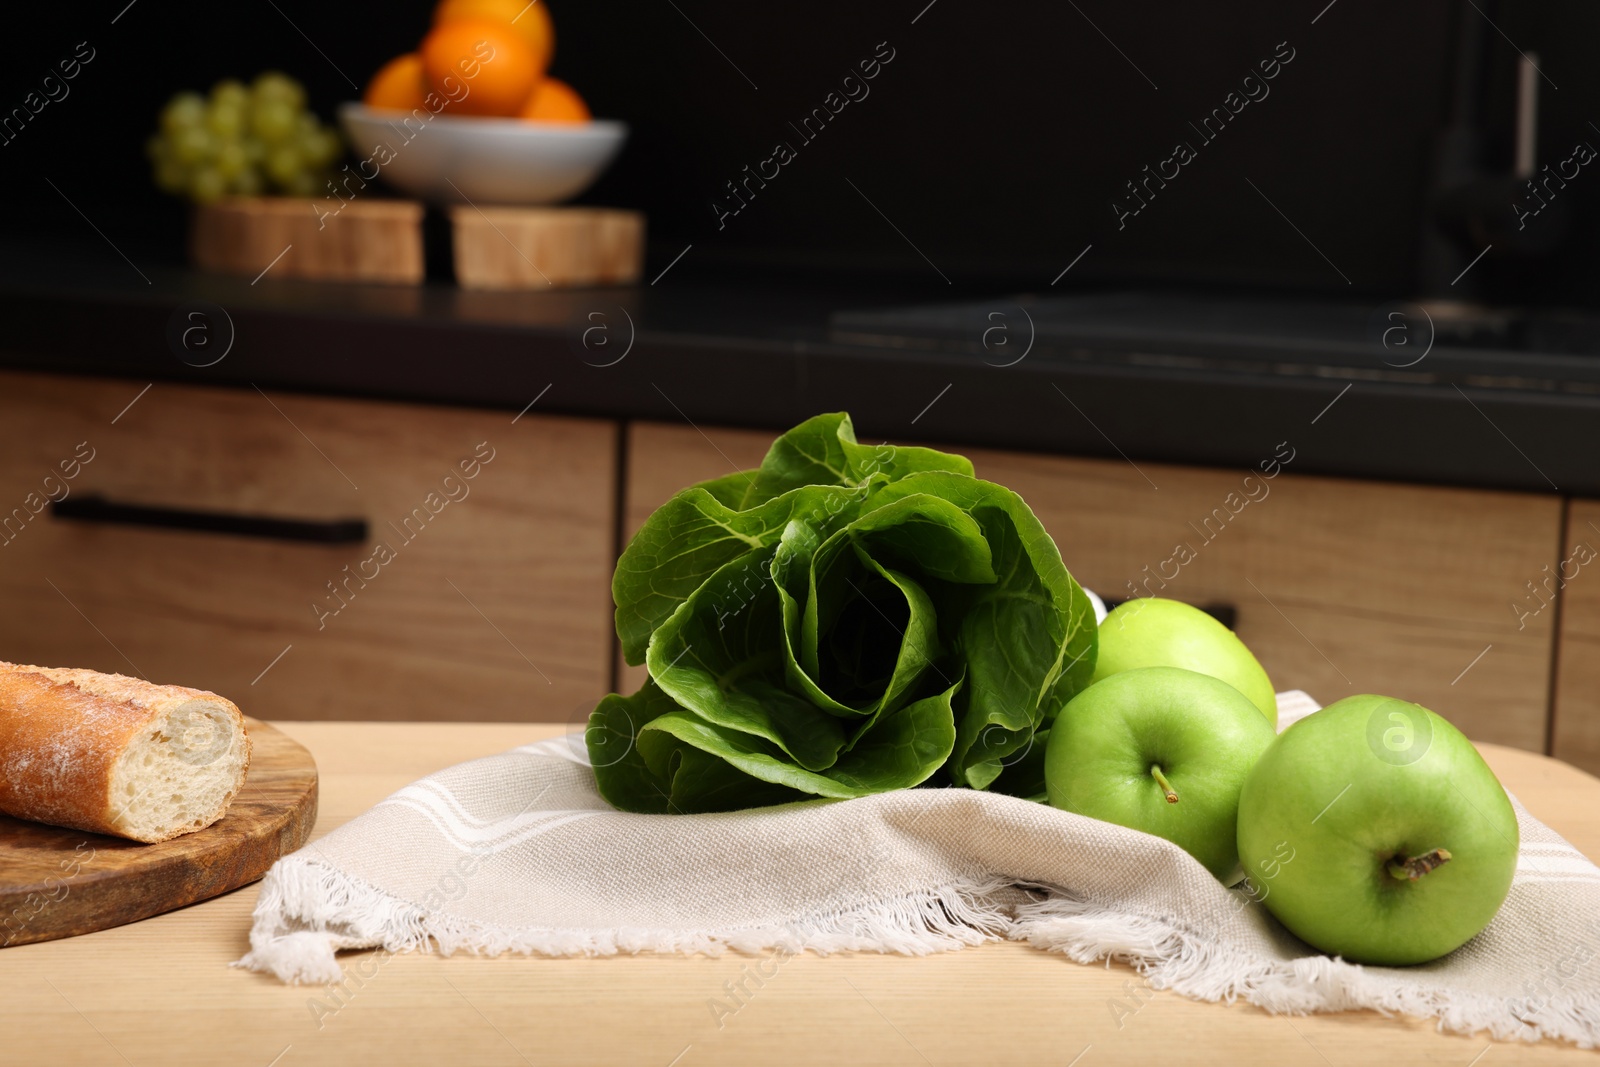 Photo of Ripe bok choy, green apples and baguette on table in kitchen